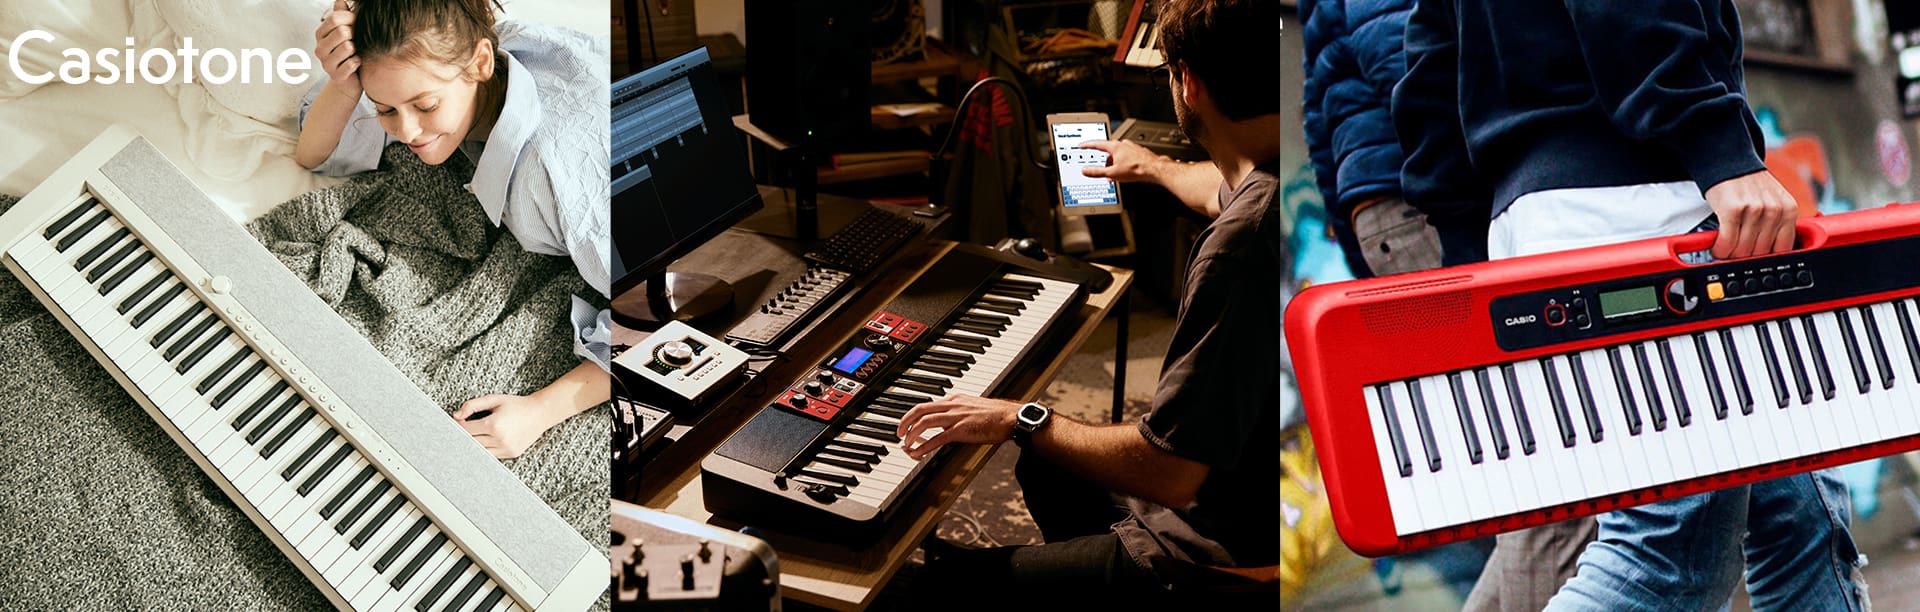 Collage of musicians interacting with Casiotone CT-S1, CT-S1000V and CT-S200 portable keyboards 3